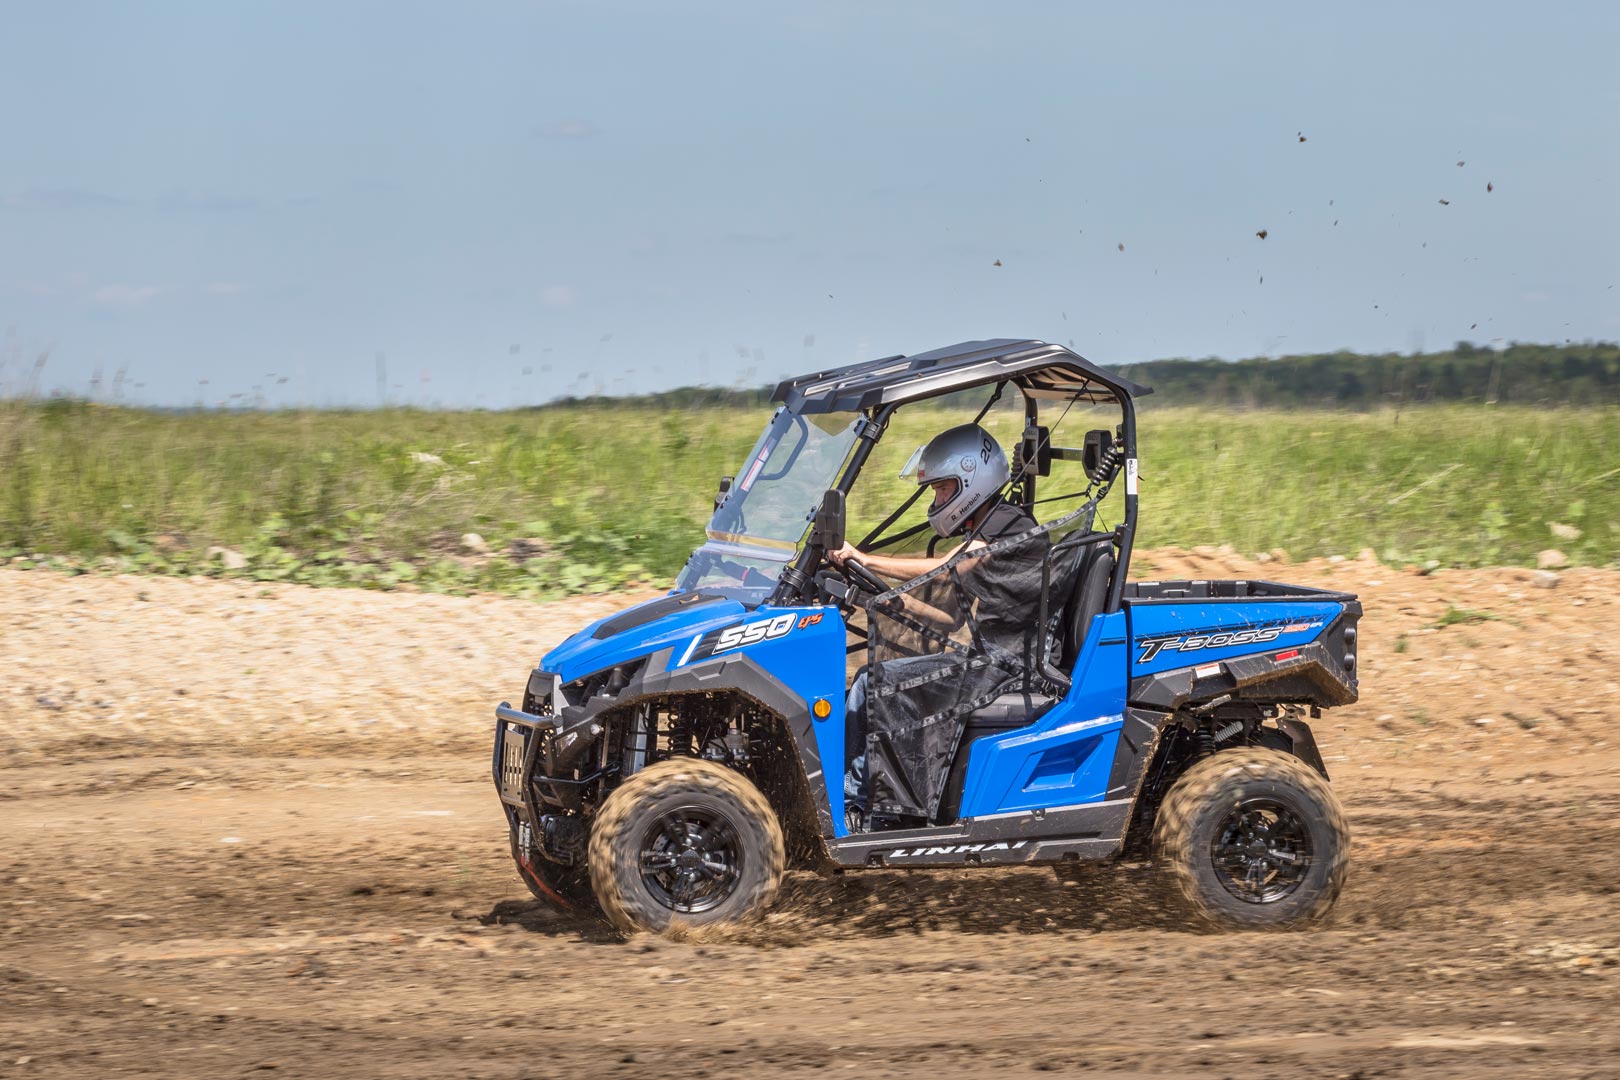 What are the different types of ATVs